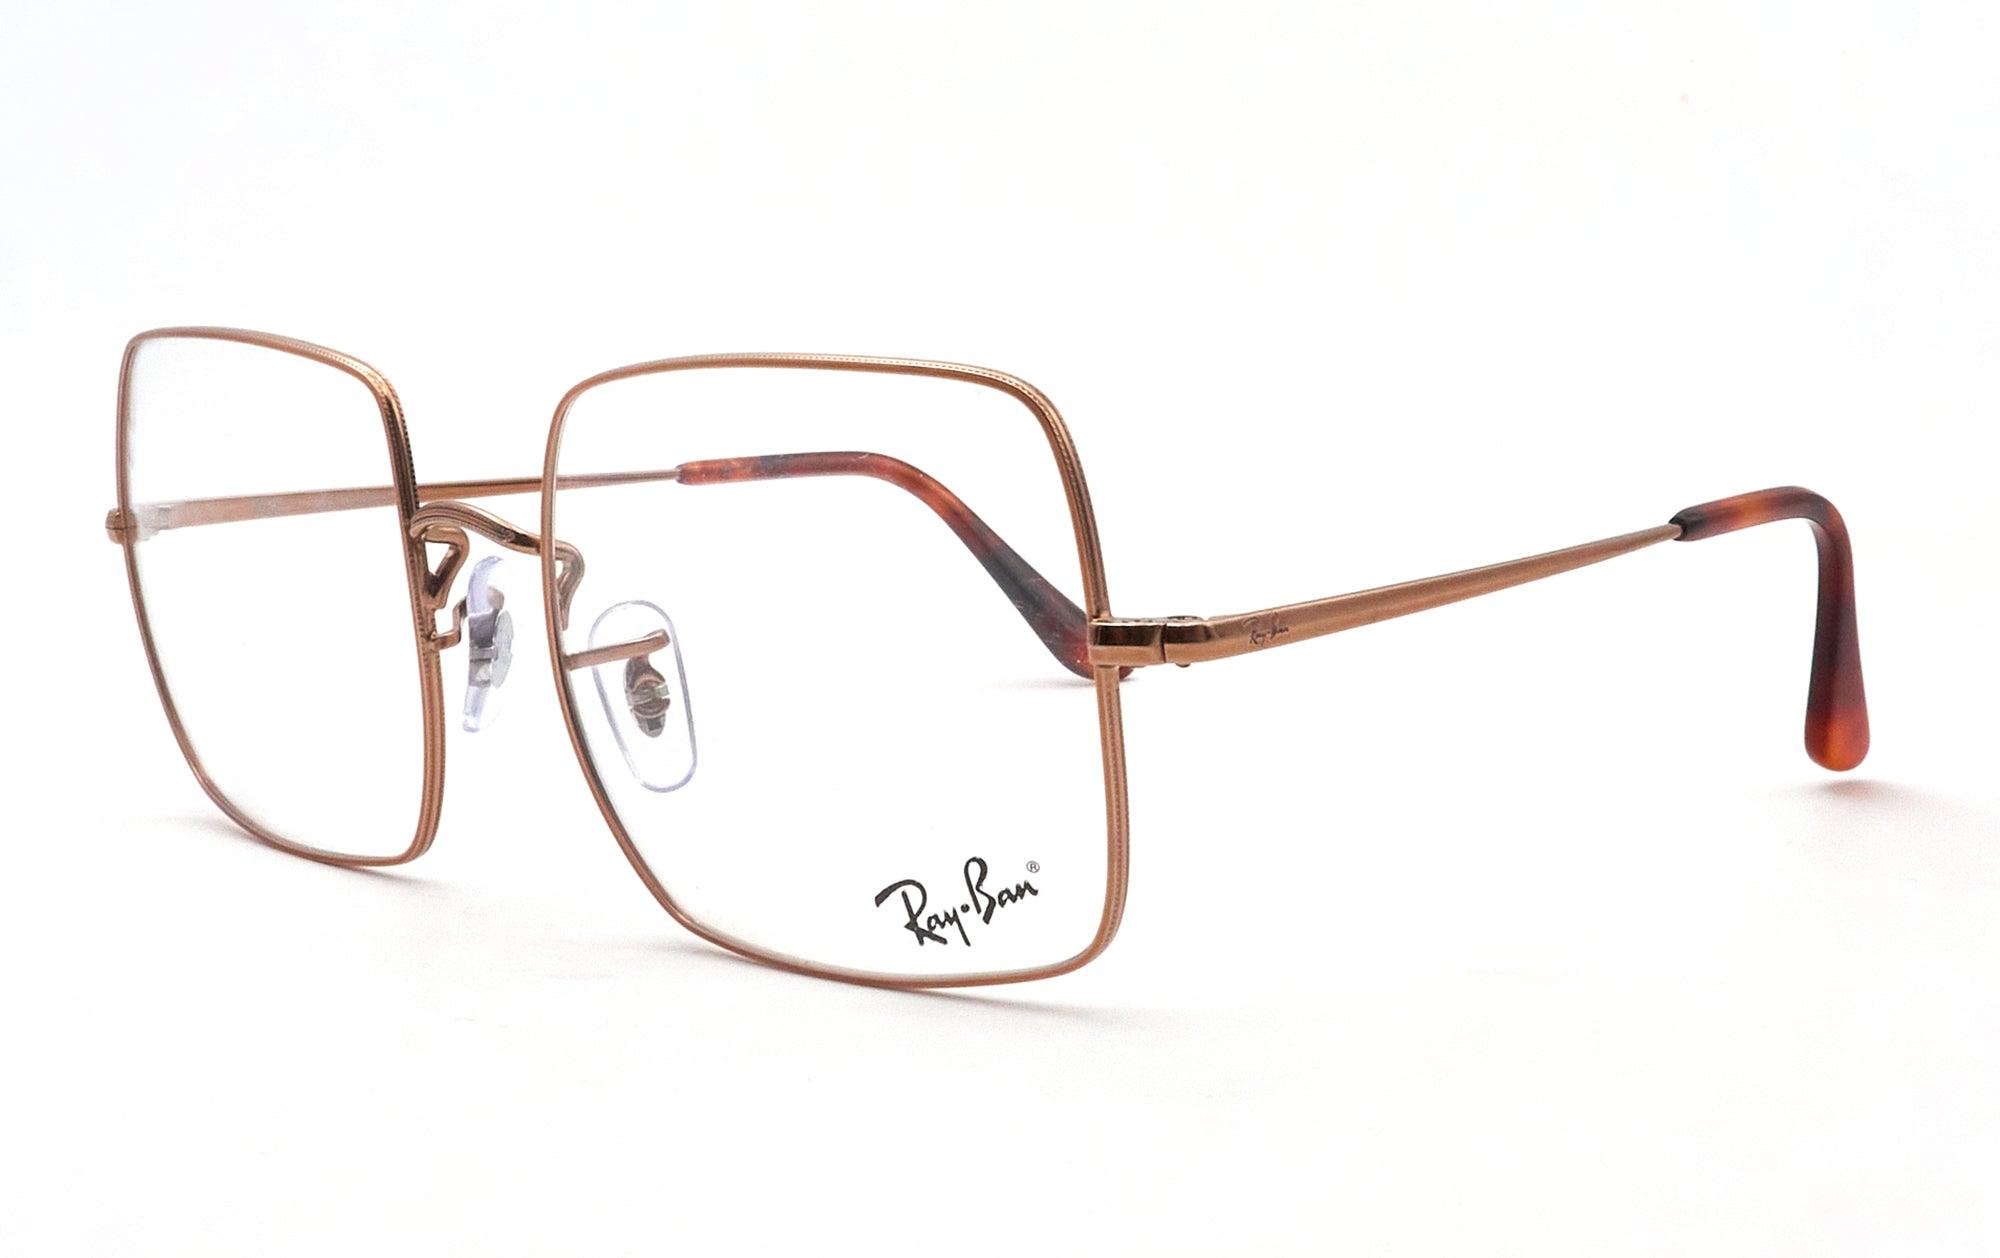 RAY-BAN 1971VL 2943 - Opticas Lookout